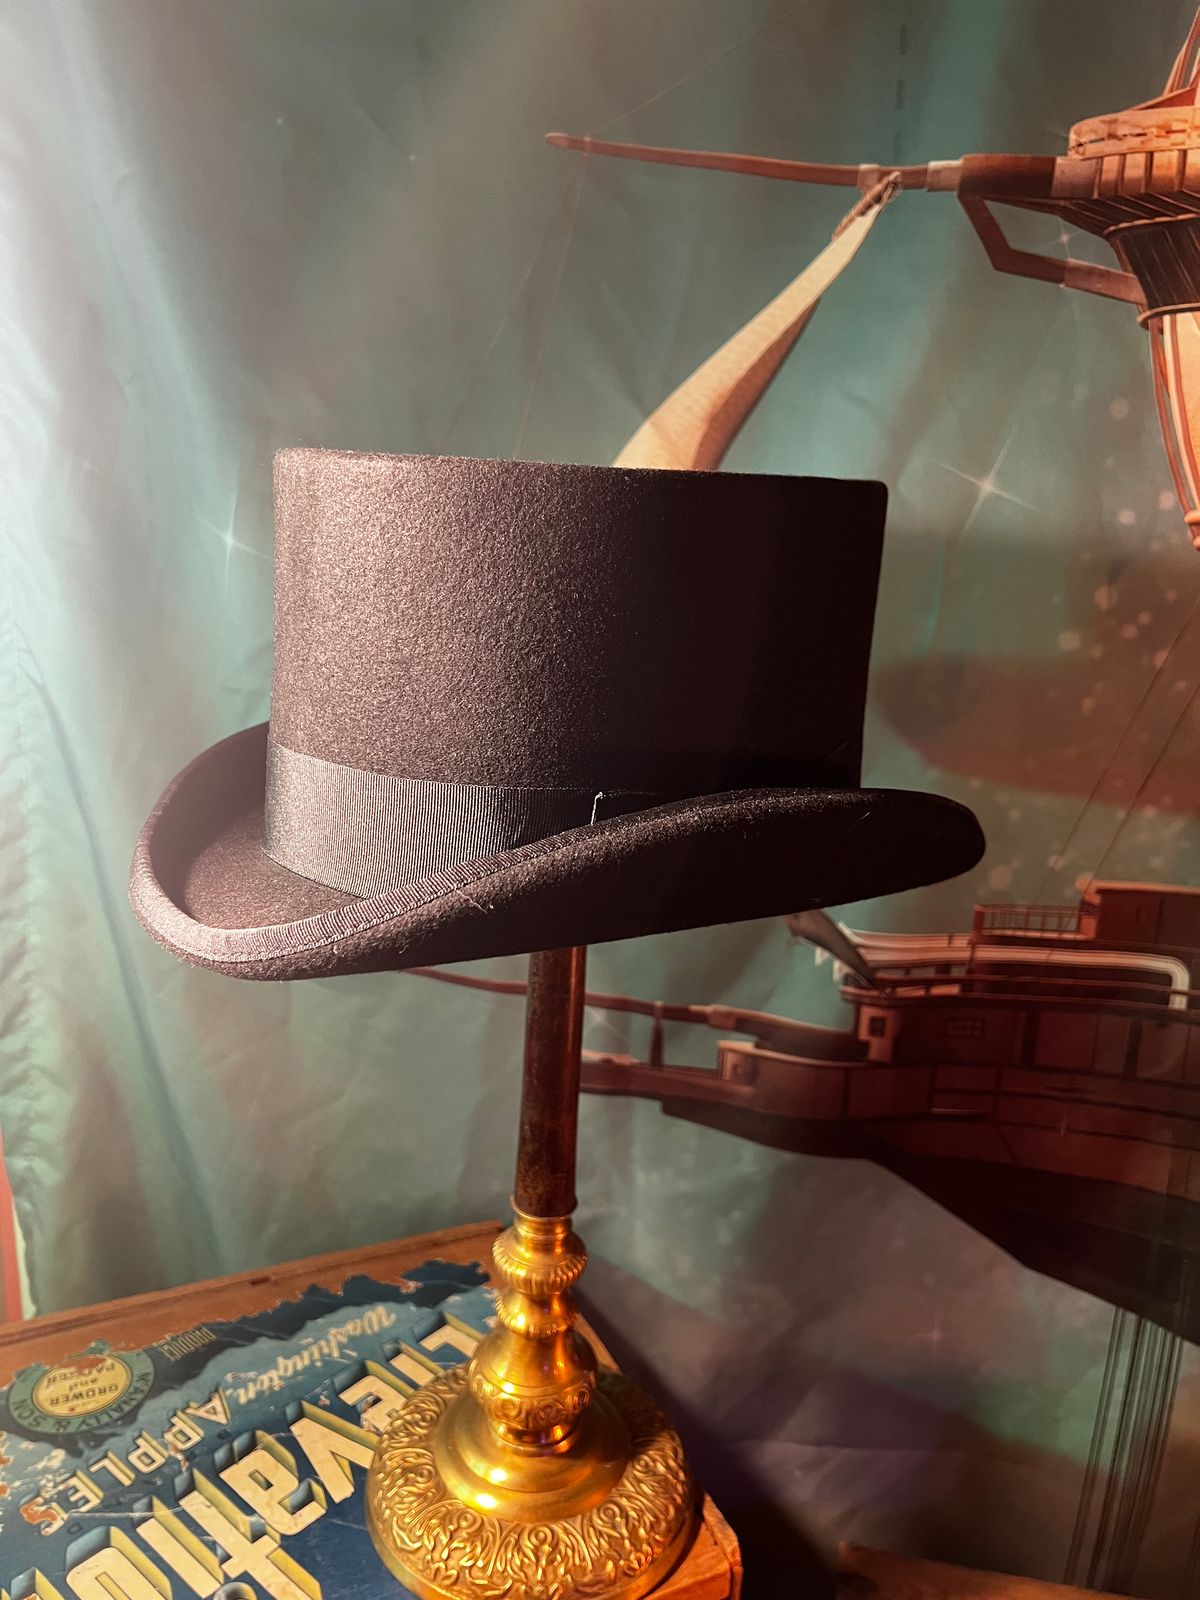 Black Top Hat with Victorian, gothic, bridgerton and steampunk flare